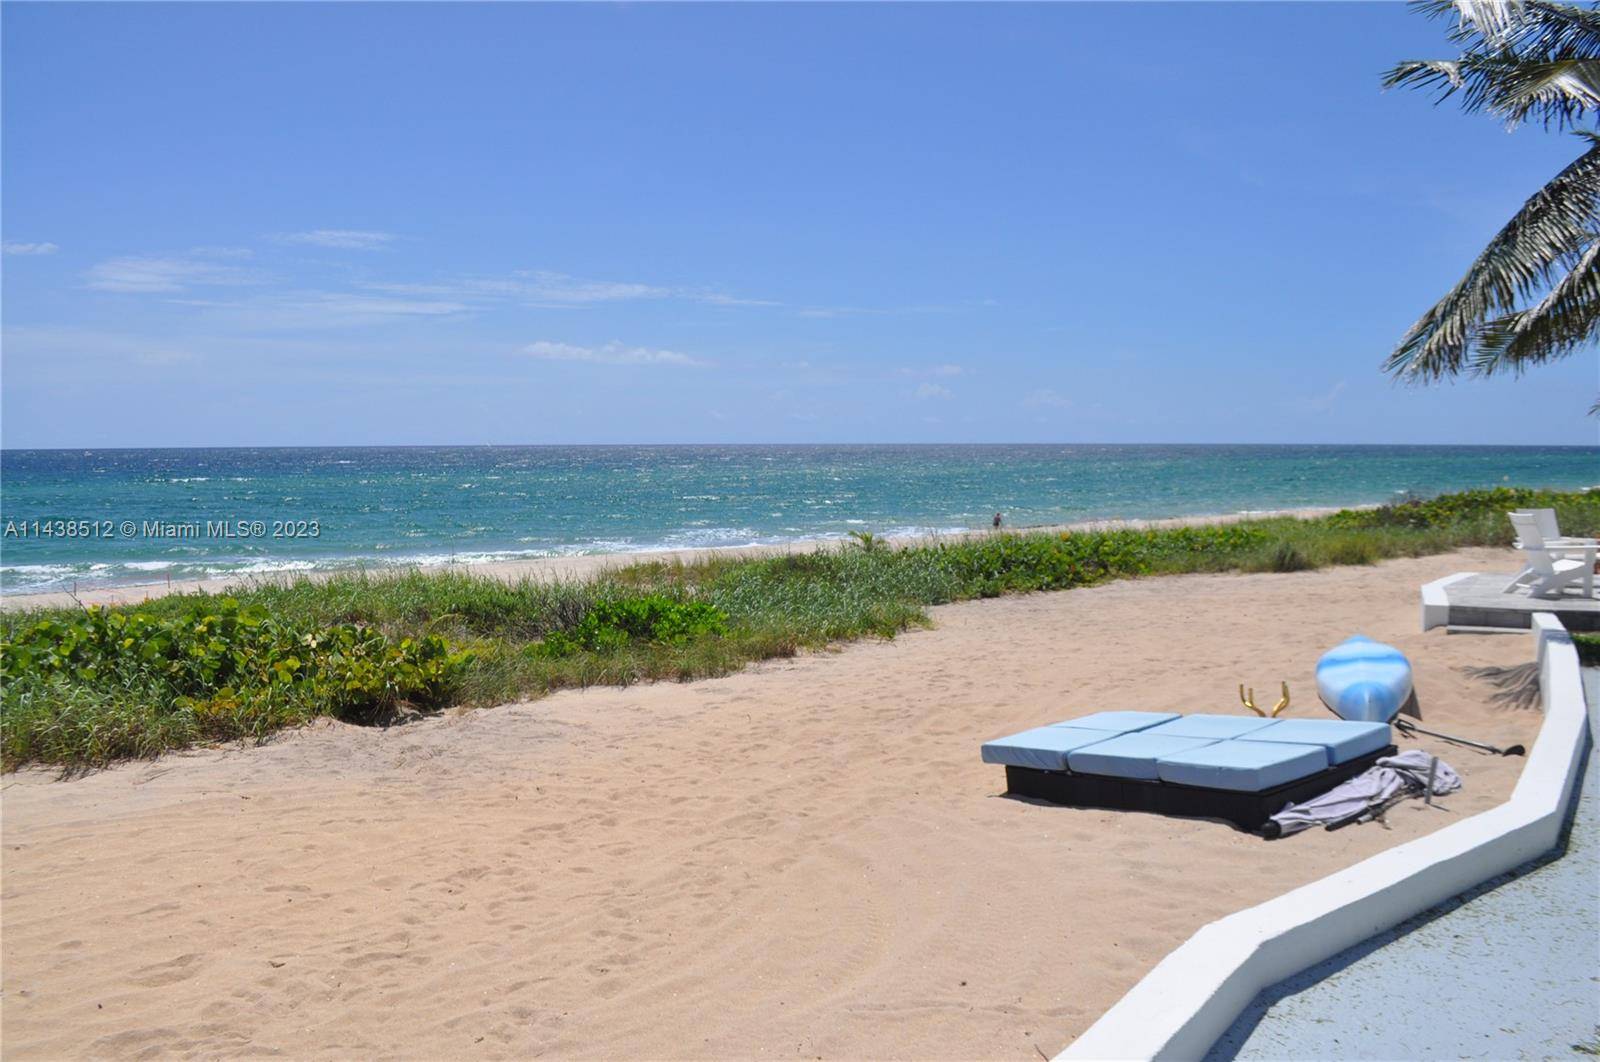 YOU'VE ARRIVED ! BEAUTIFULLY RENOVATED OCEANFRONT CONDO WITH BOTH OCEAN AND INTRACOASTAL VIEWS.